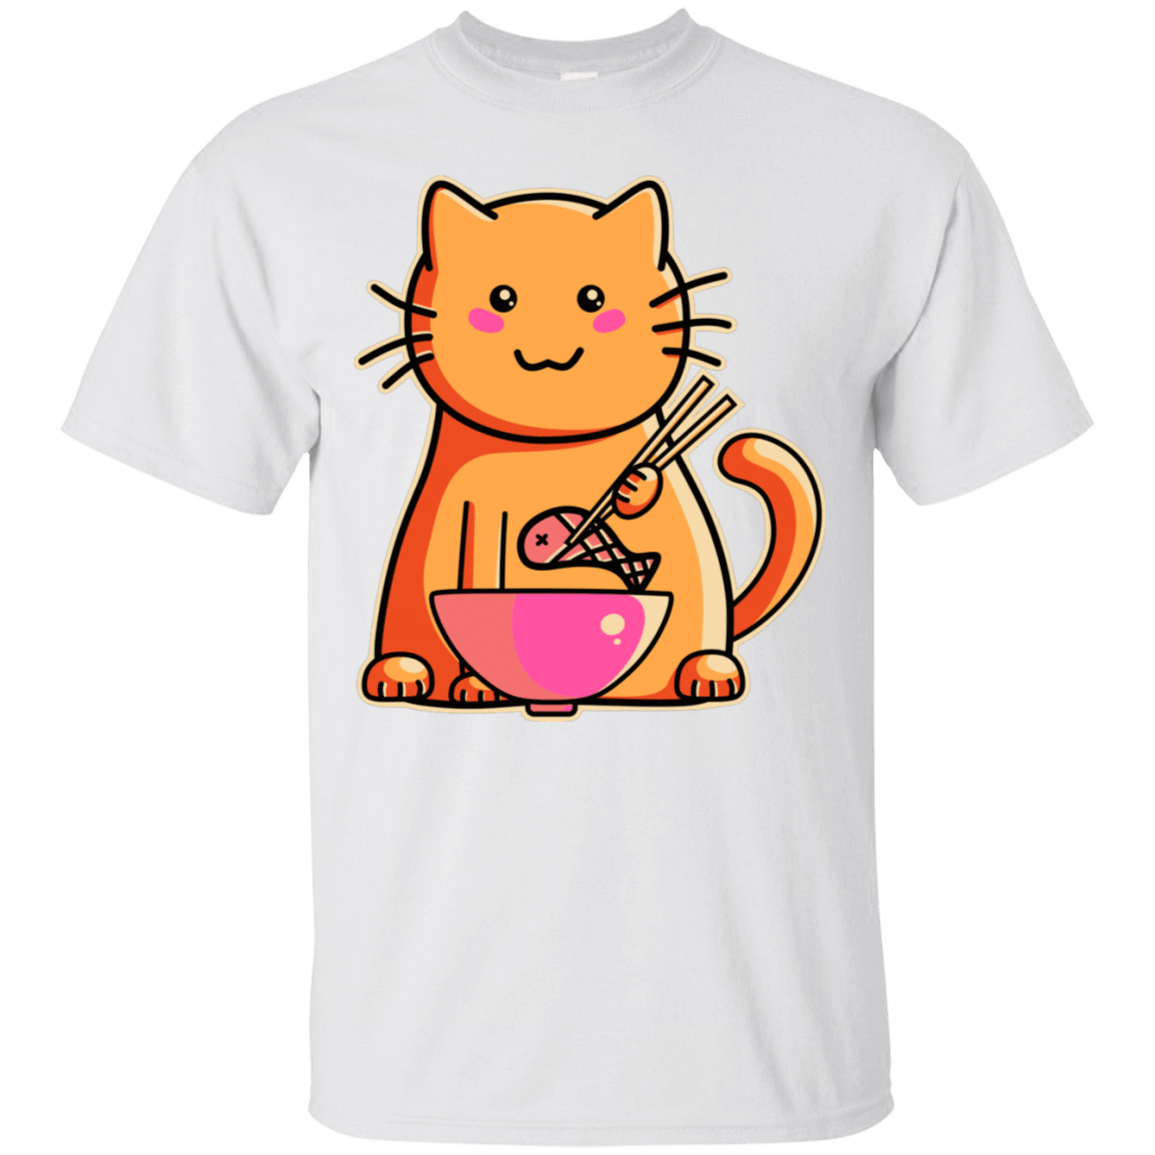 T-Shirts White / S Cats Favourite Meal T-Shirt